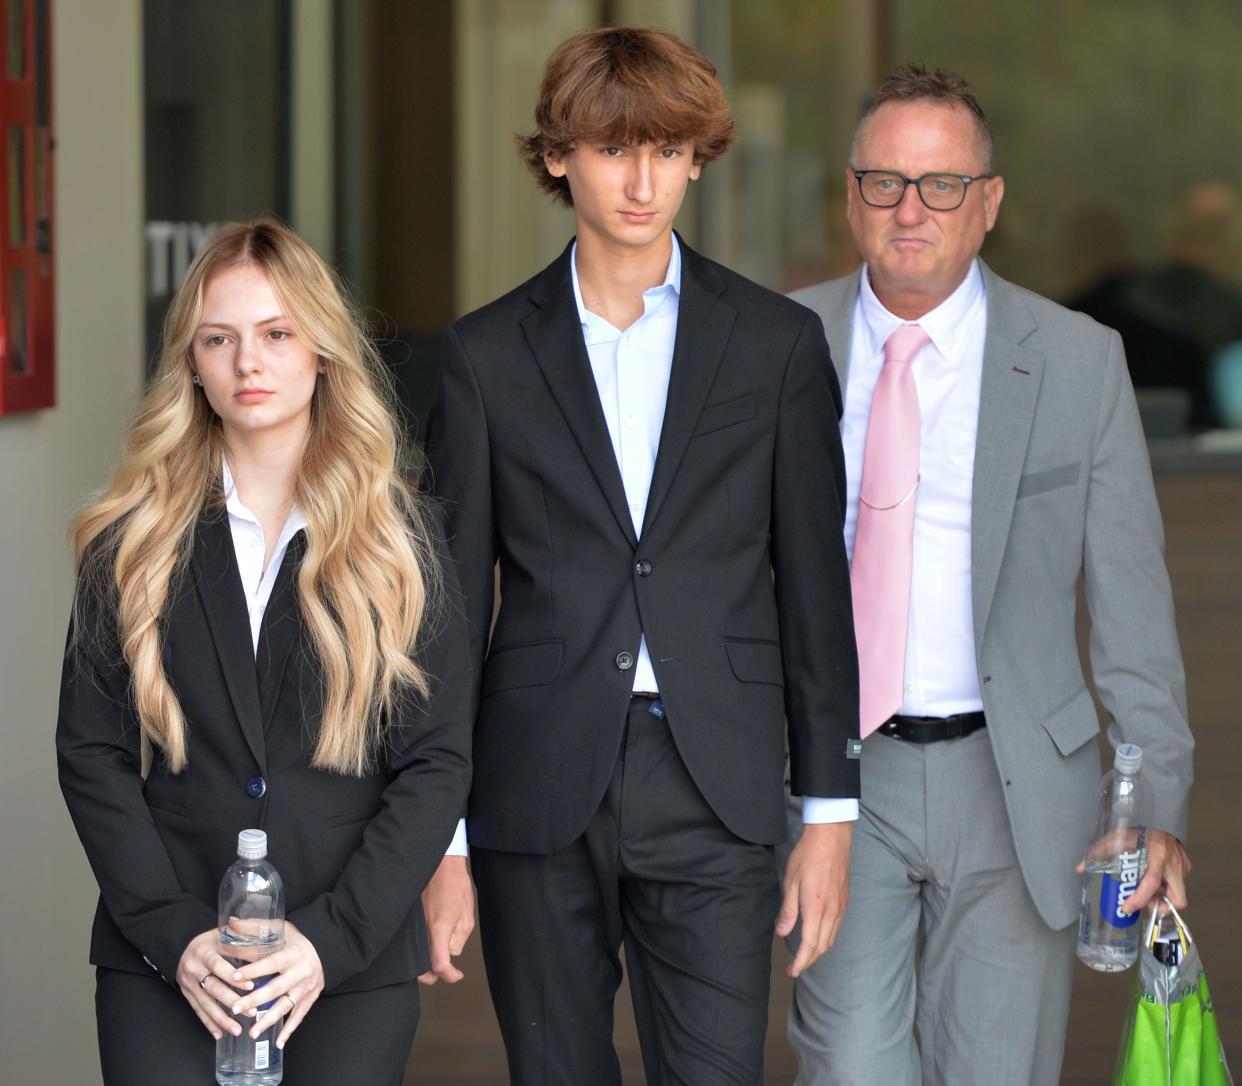 Maya, Kyle and Jack Kowalski leave the South Coutny Courthouse in Venice, Florida on Thursday afternoon at the conclusion of the first day of their civil lawsuit against Johns Hopkins All Children's Hospital.